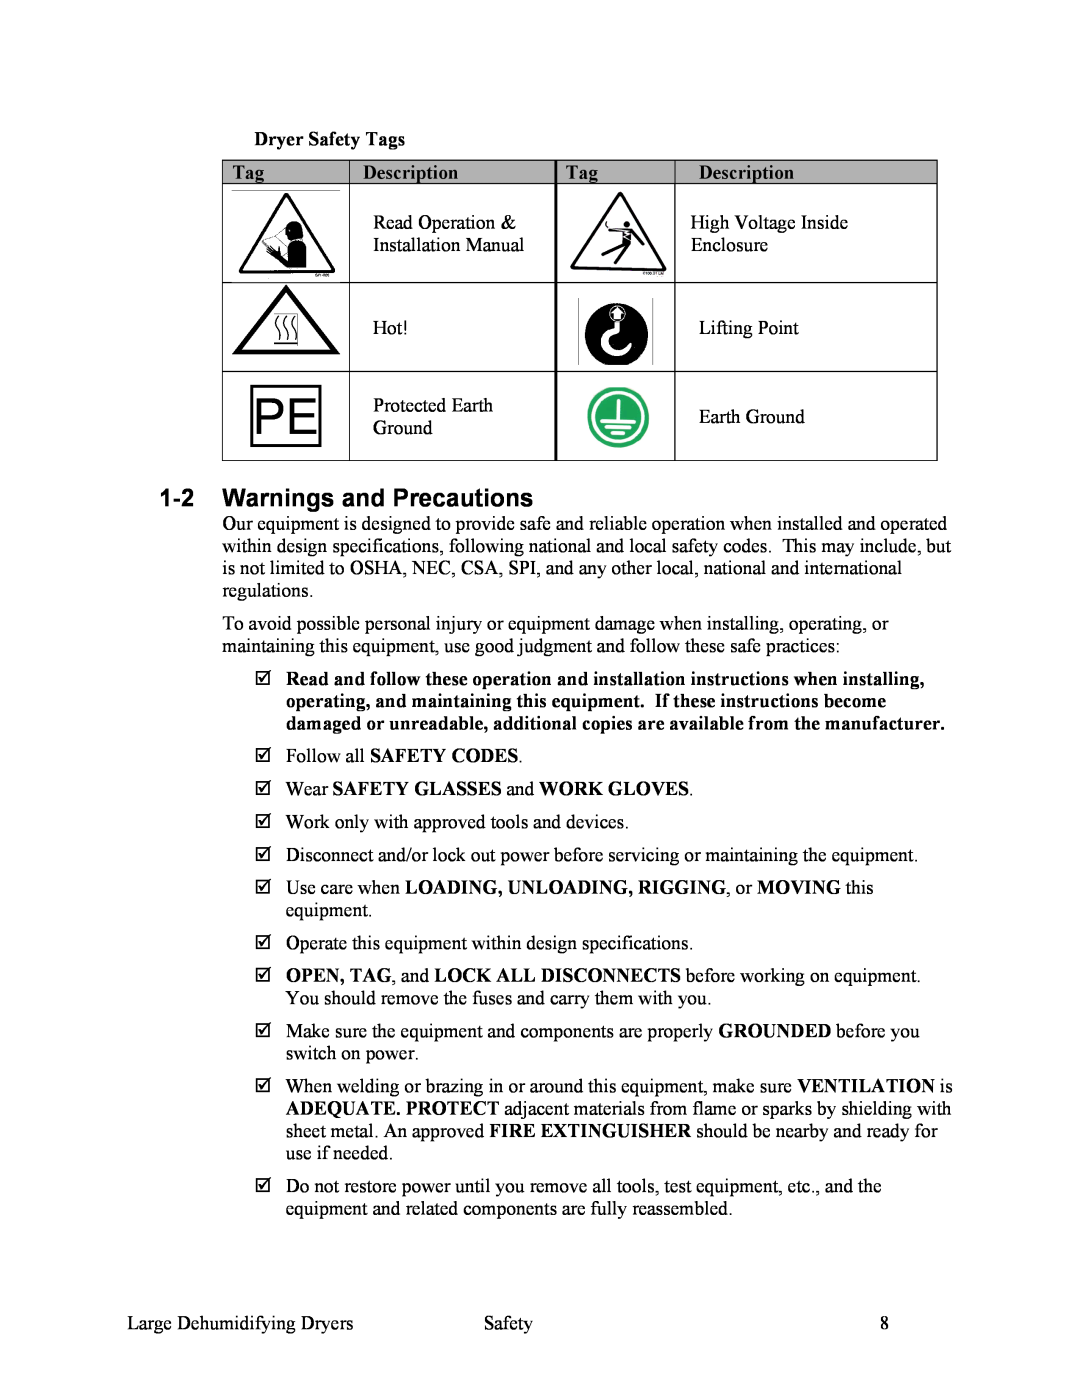 Sterling 882.00295.00 1-2Warnings and Precautions, Dryer Safety Tags, Description, Wear SAFETY GLASSES and WORK GLOVES 